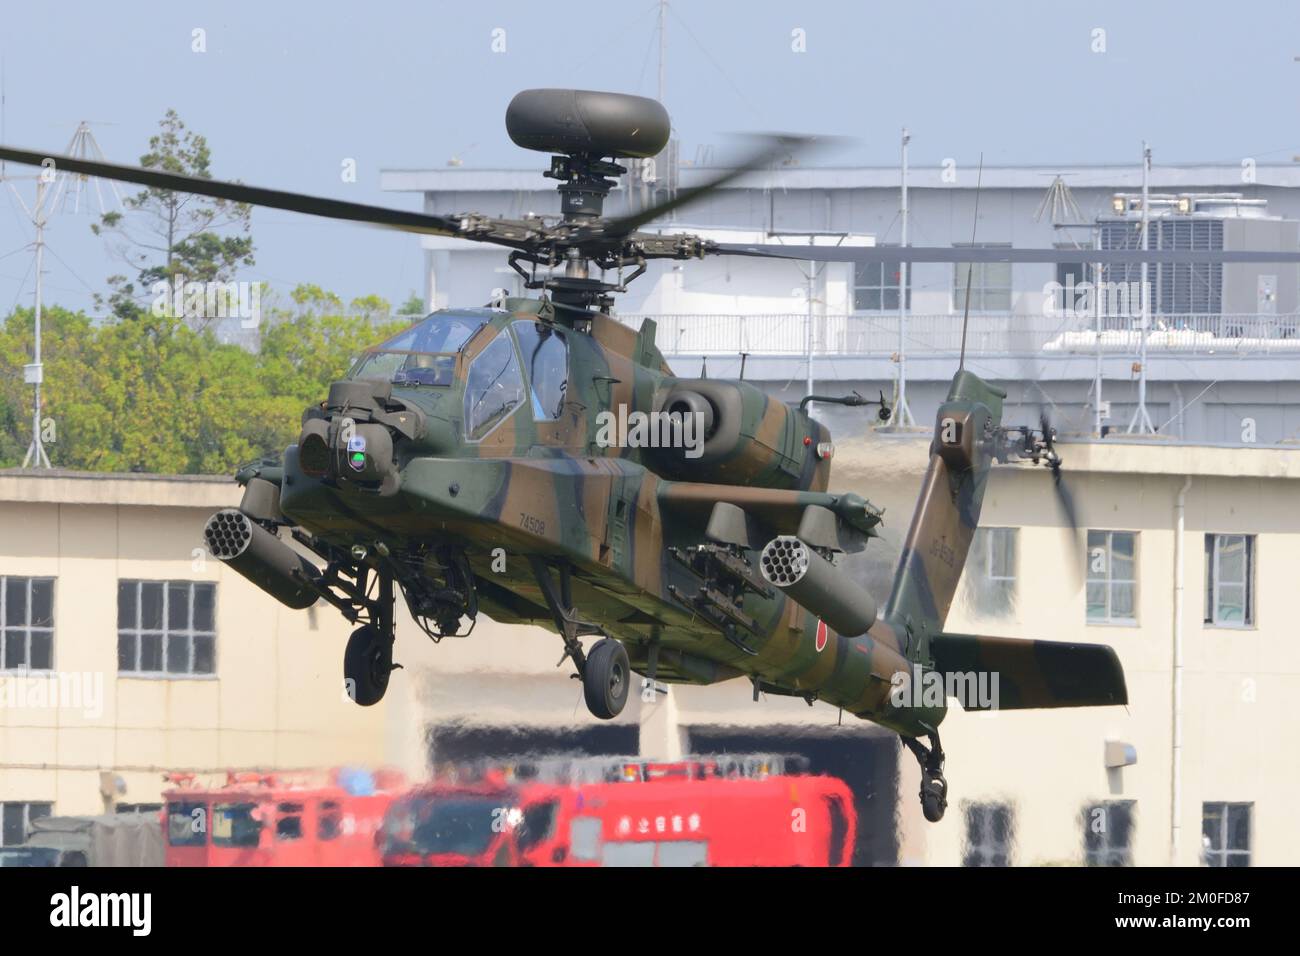 Ibaraki Prefecture, Japan - May 17, 2015: Japan Ground Self-Defense Force Boeing AH-64D Apache Longbow attack helicopter. Stock Photo